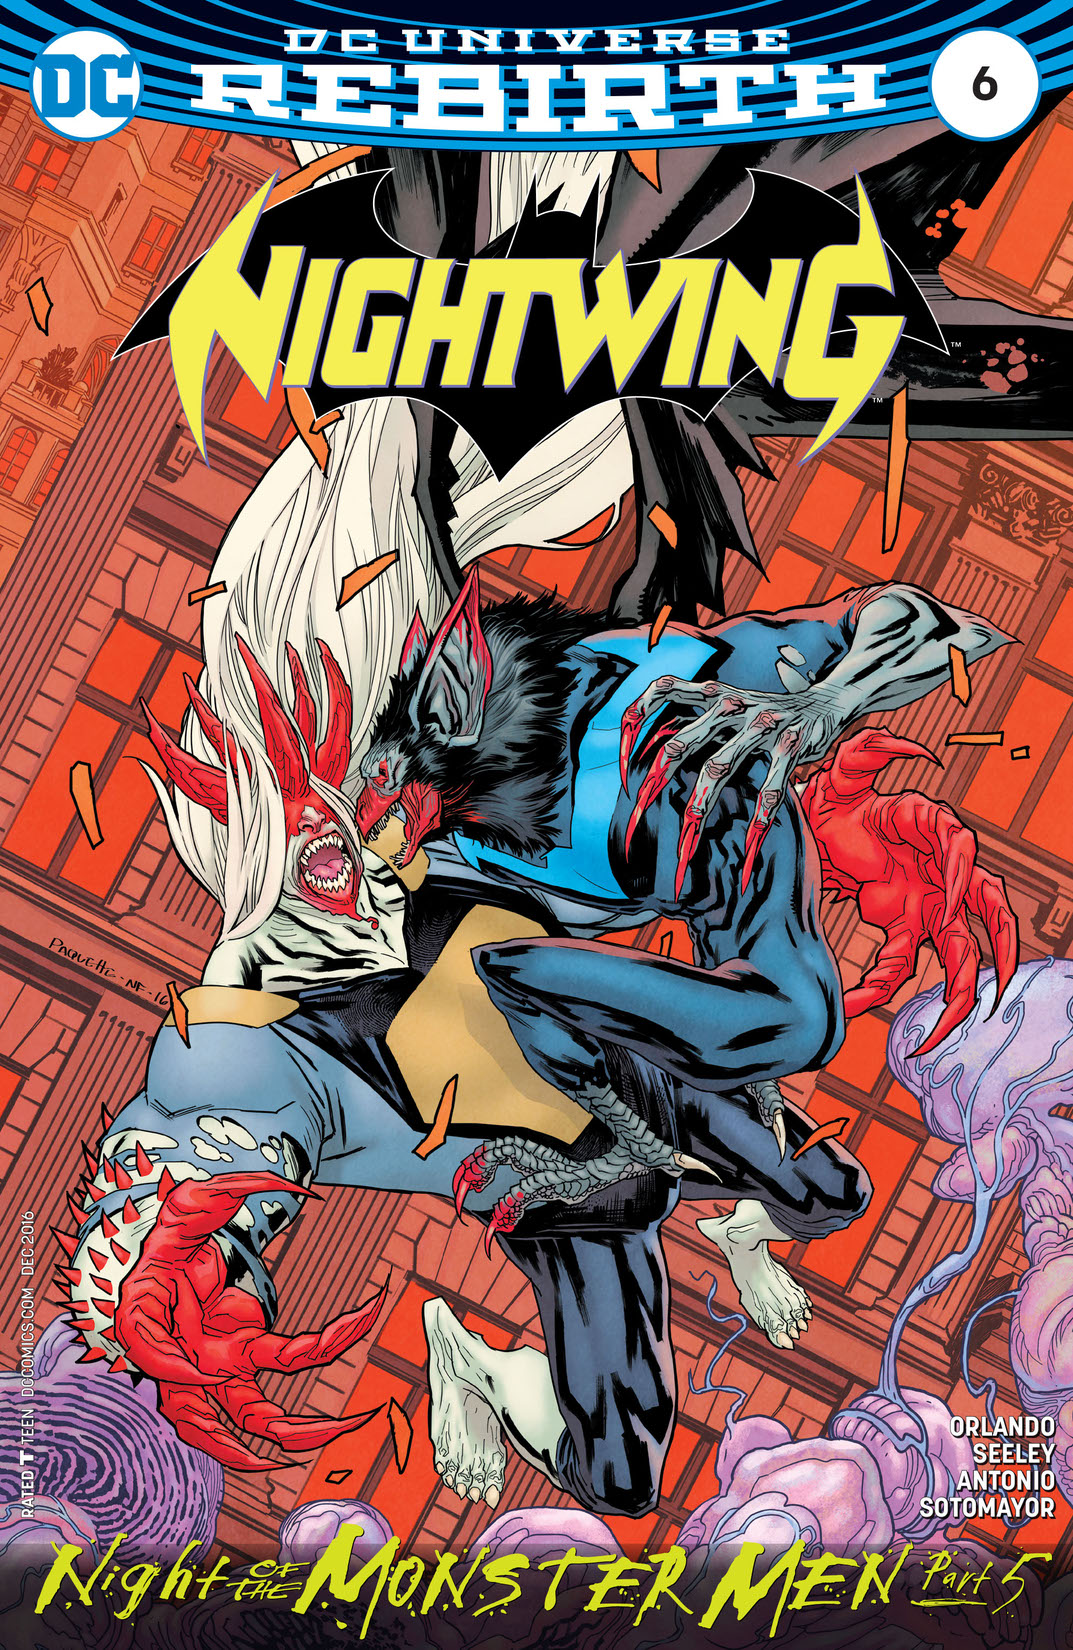 Nightwing (2016-) #6 preview images